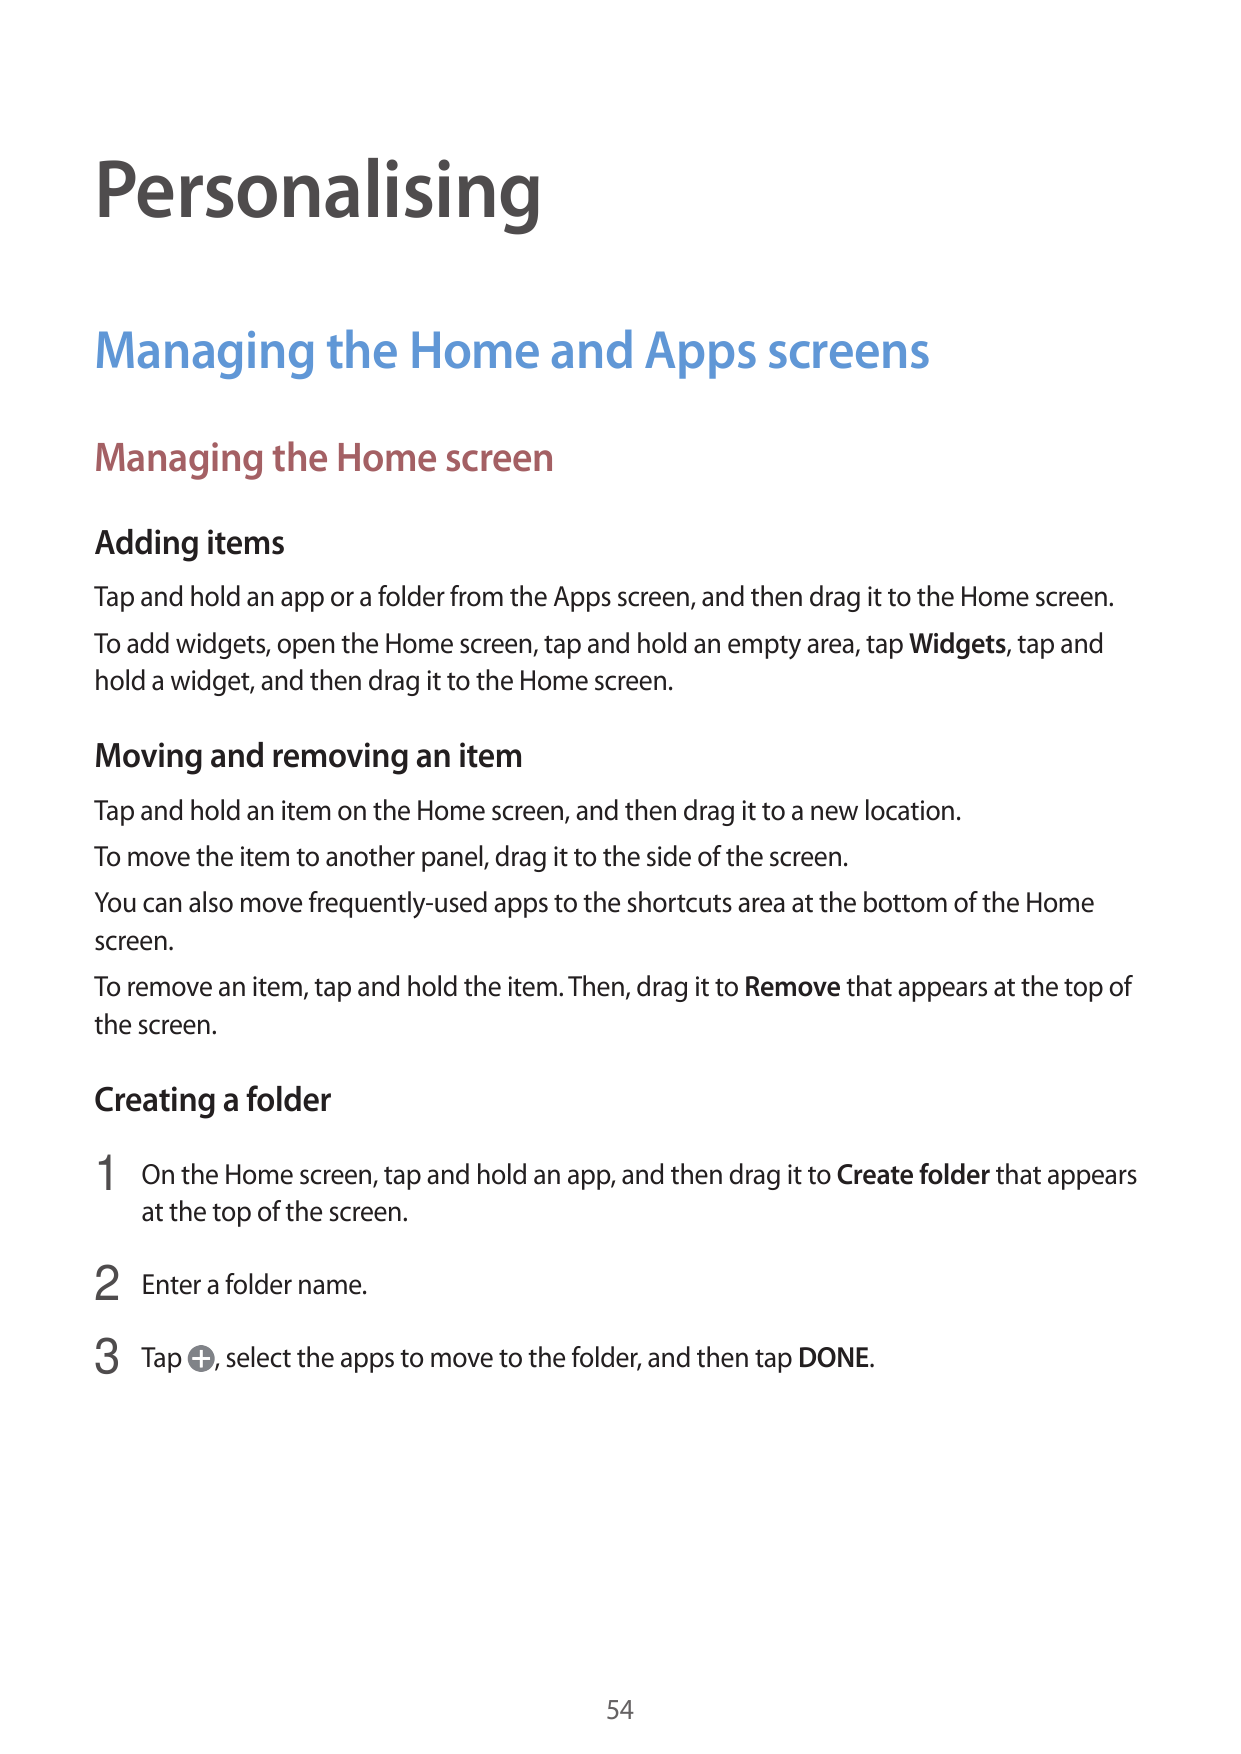 PersonalisingManaging the Home and Apps screensManaging the Home screenAdding itemsTap and hold an app or a folder from the Apps